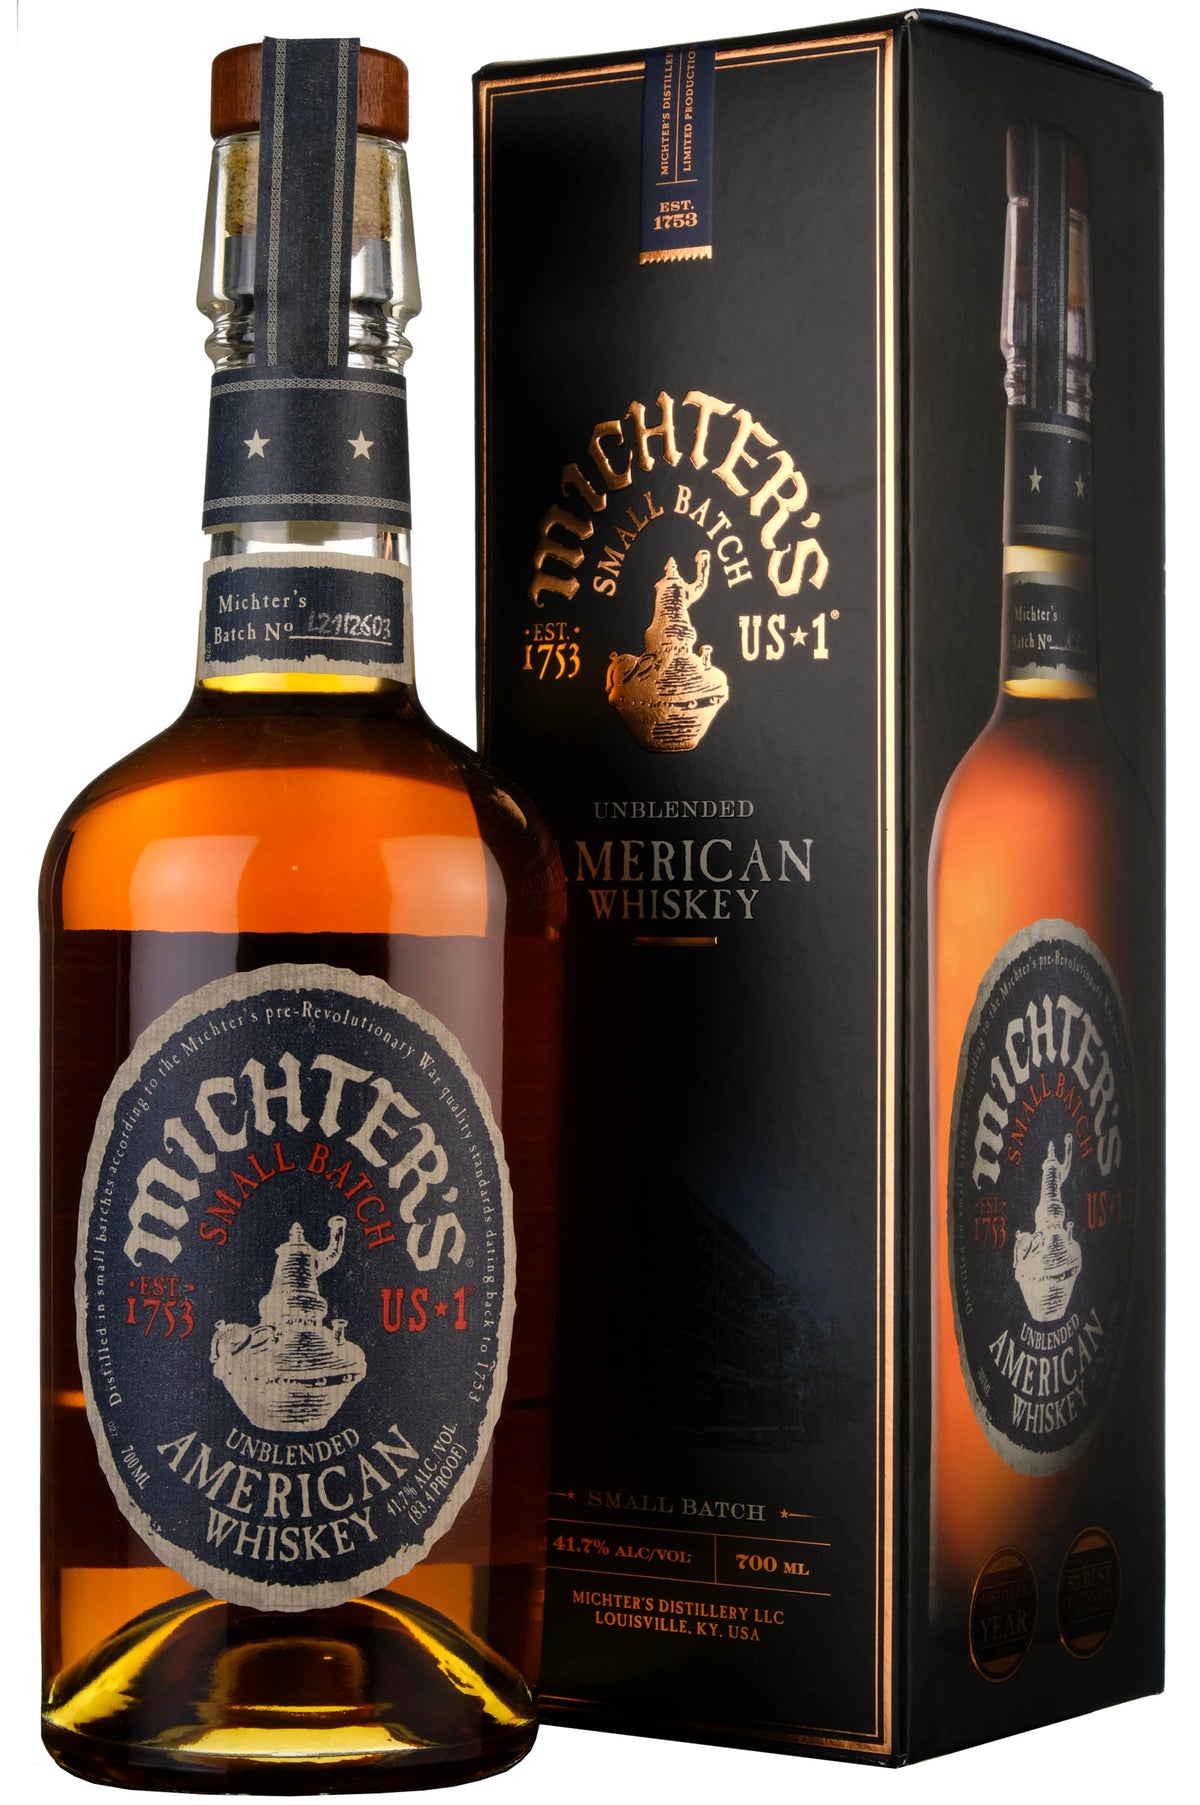 Michter's US*1 Unblended American Whiskey Small Batch L21I2603 Bottled 2021